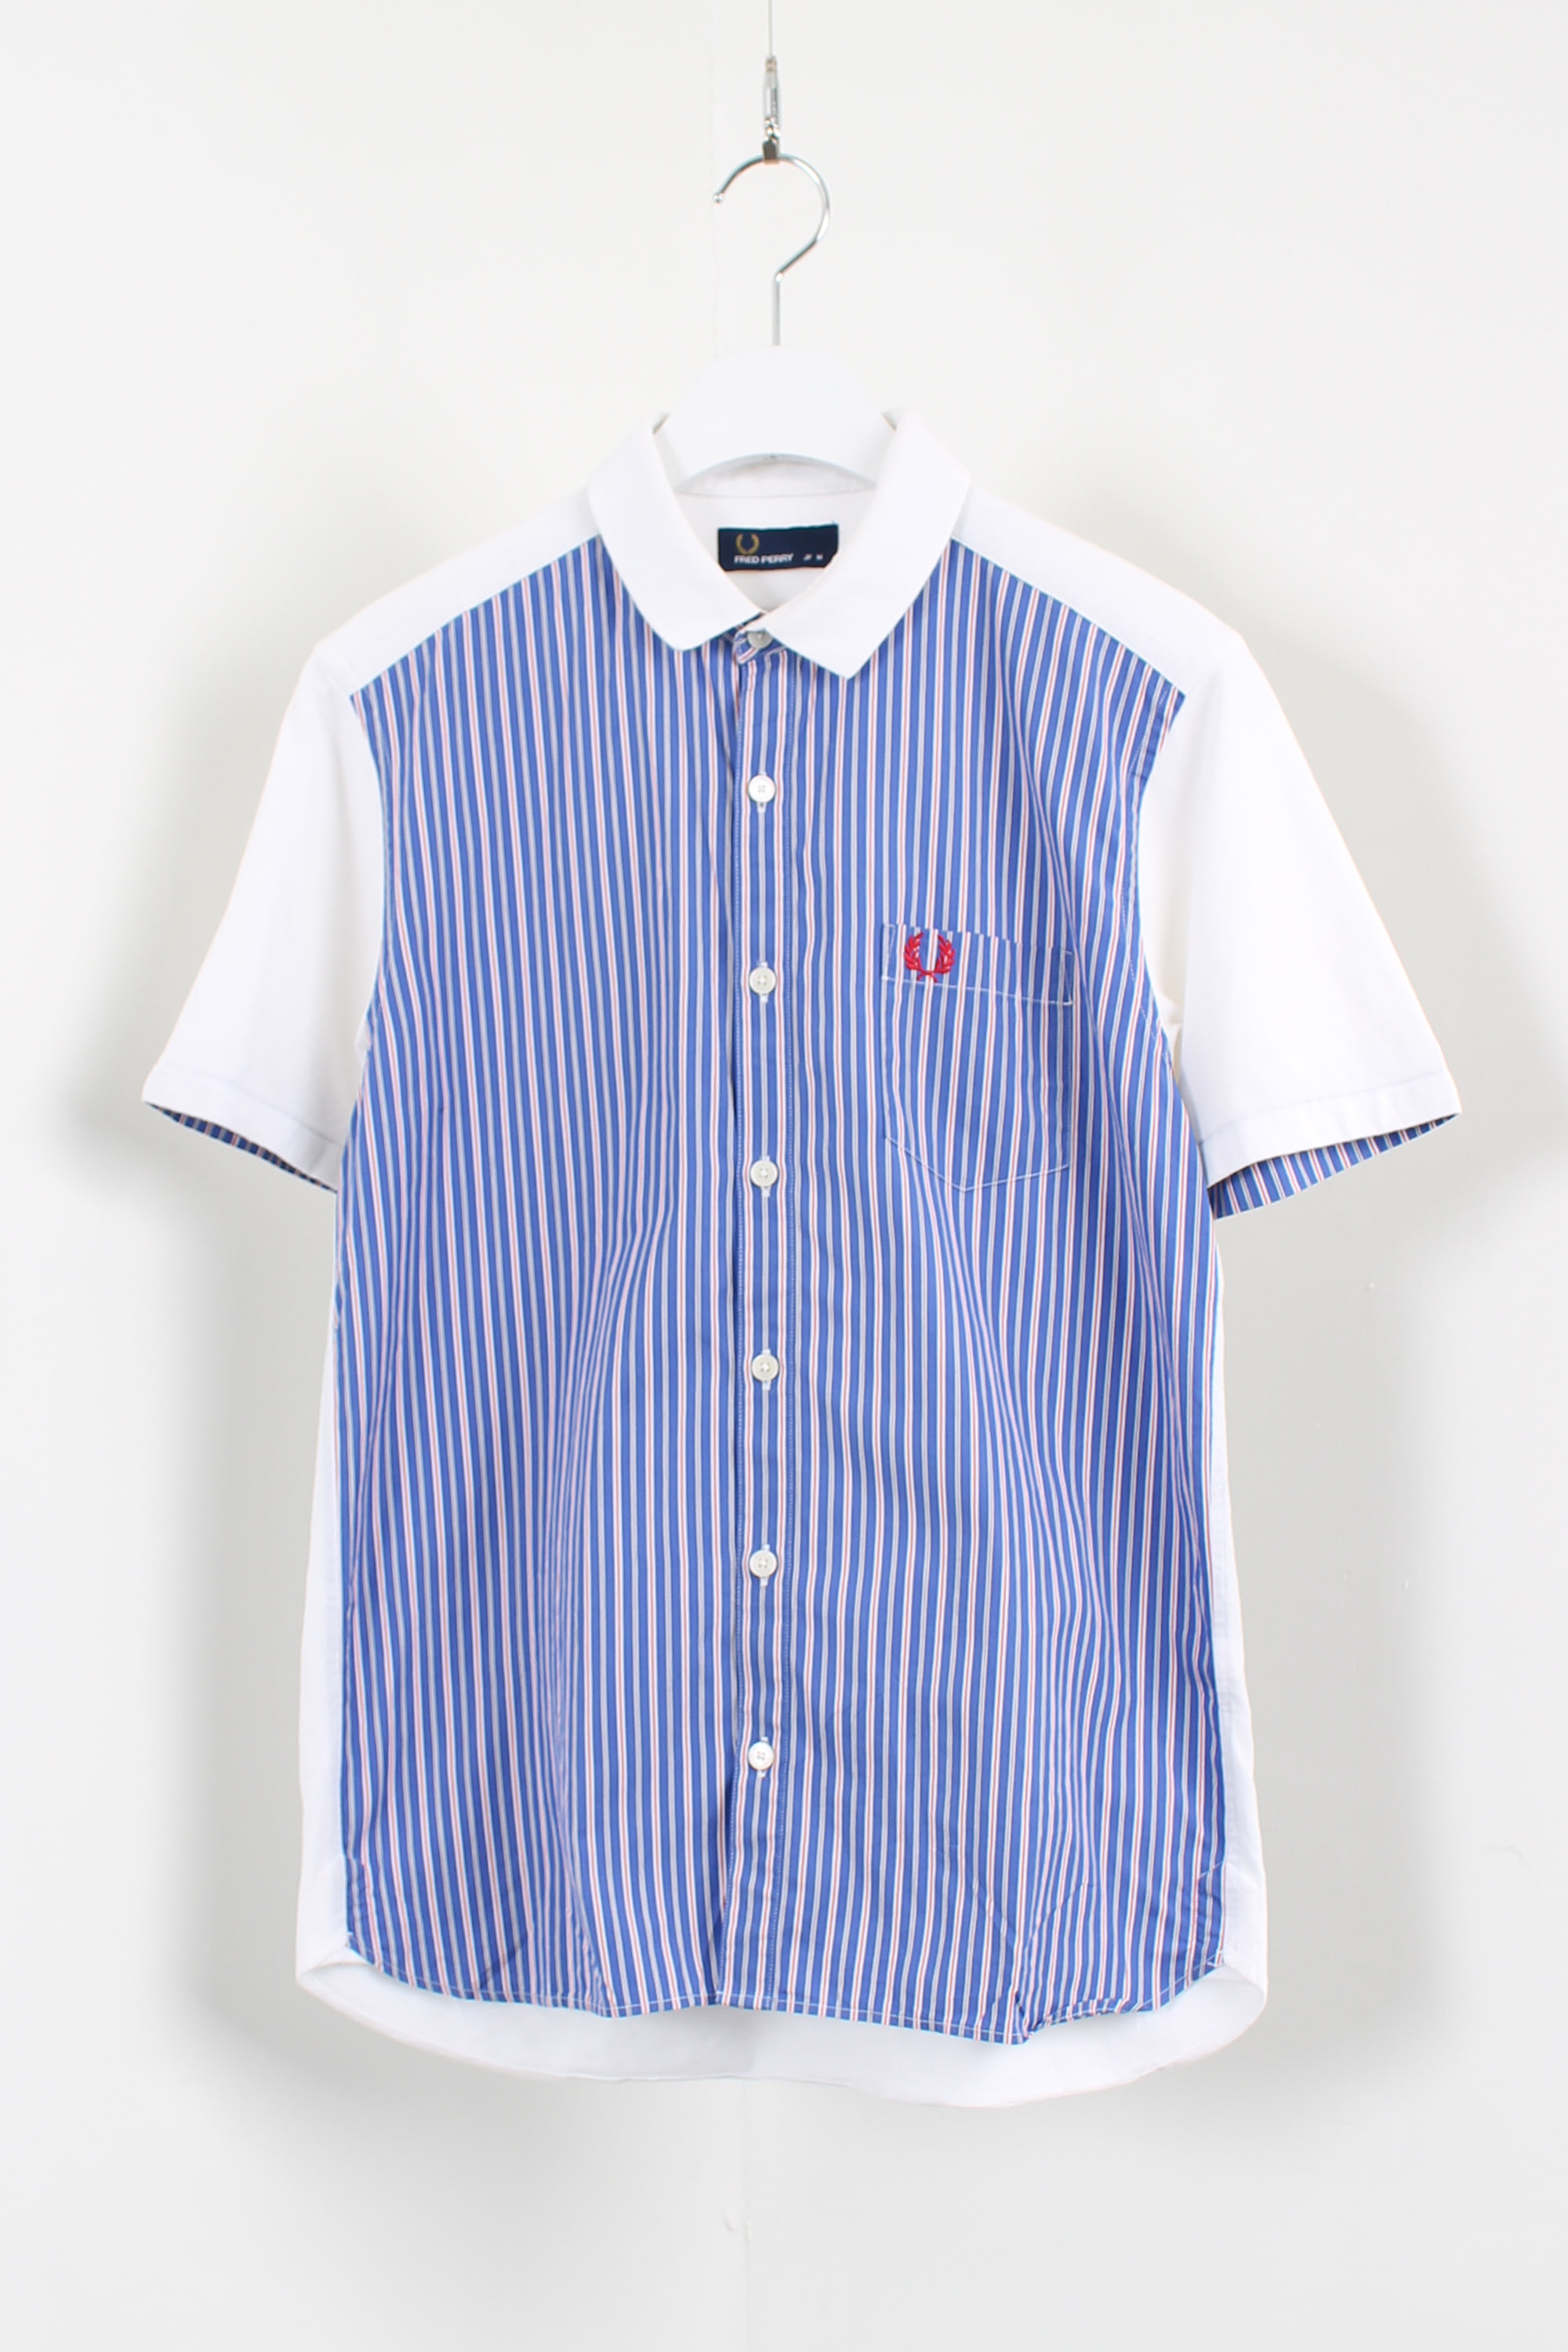 fred perry shirt